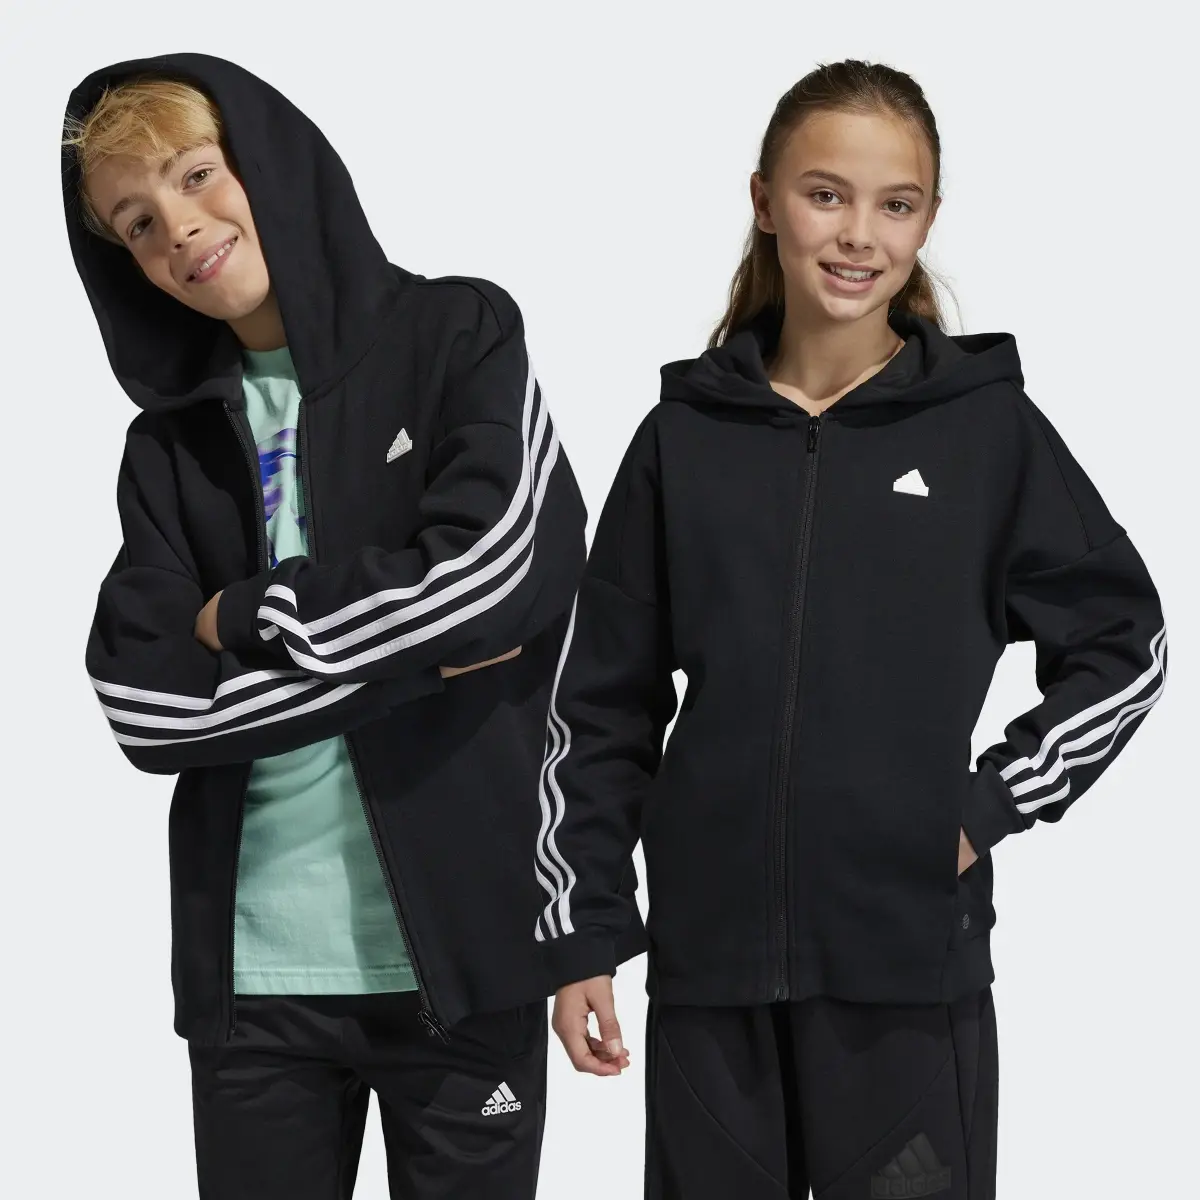 Adidas Future Icons 3-Stripes Full-Zip Hooded Track Top. 1